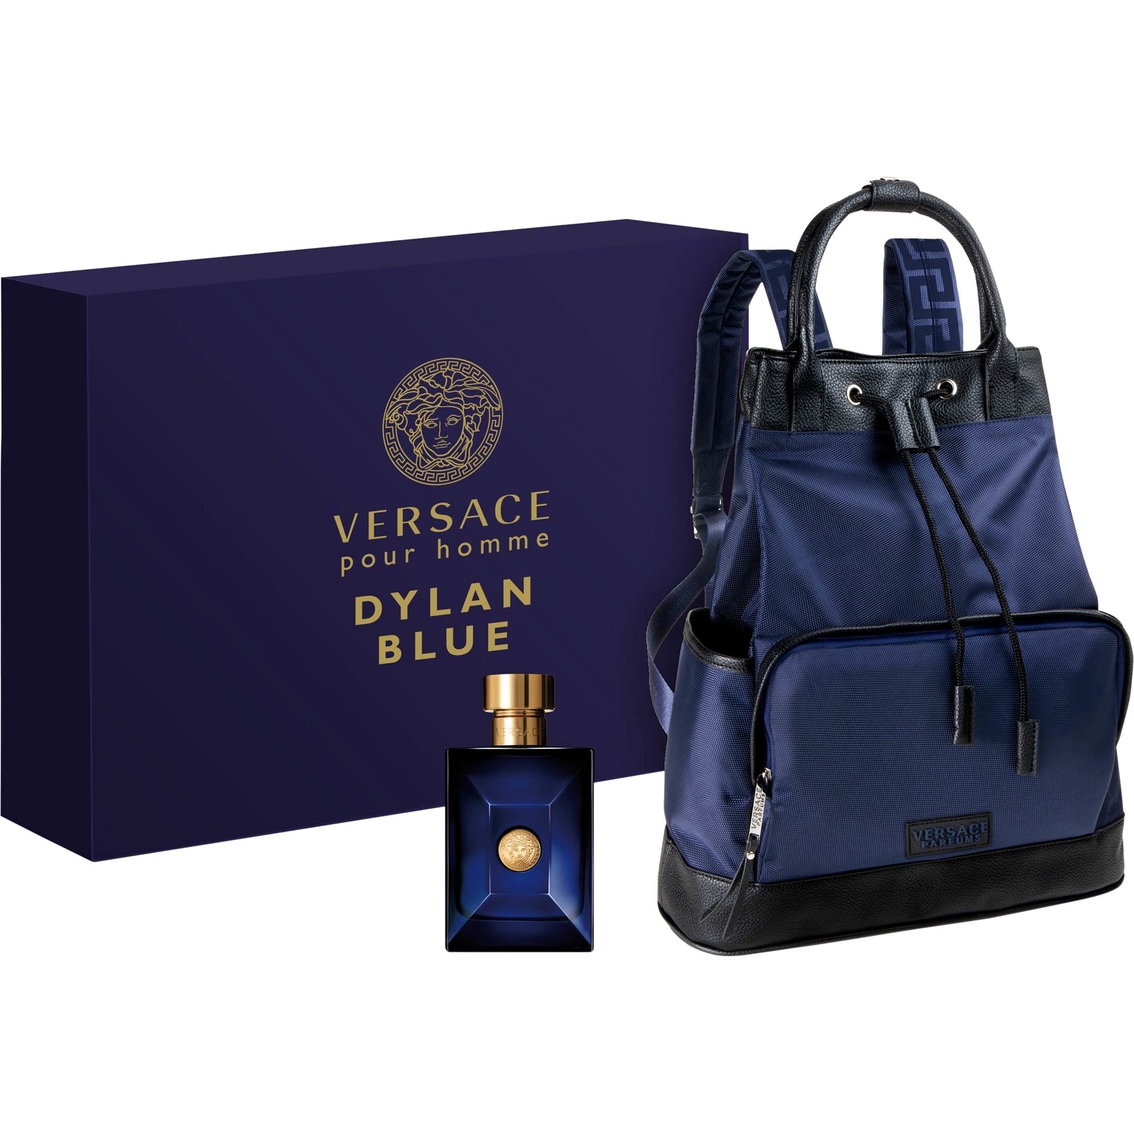 versace dylan blue with backpack